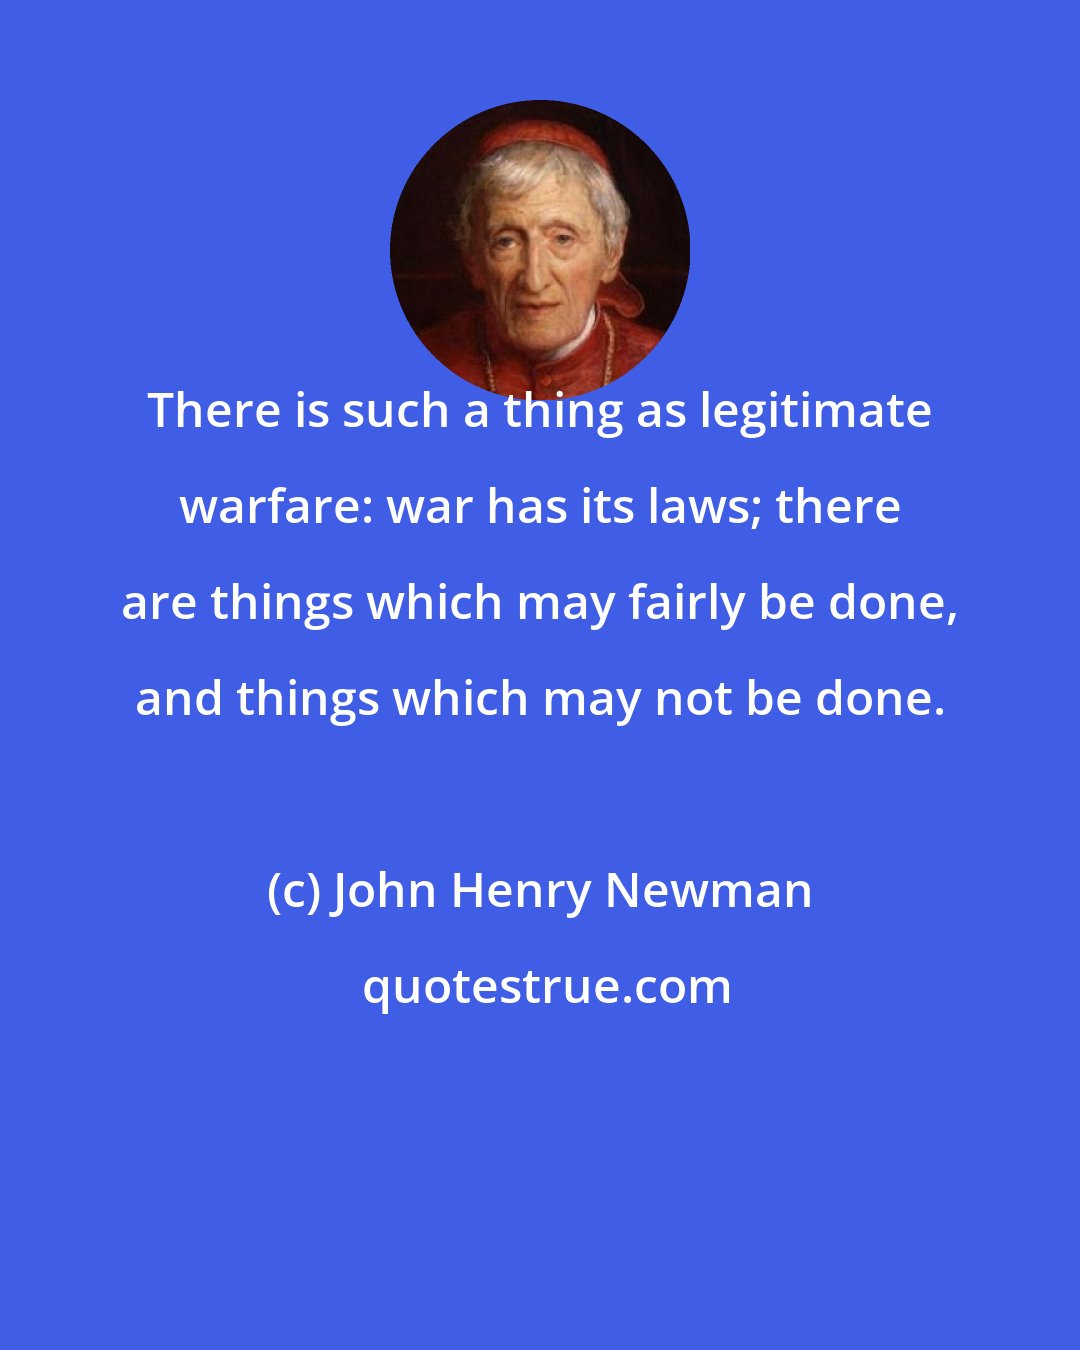 John Henry Newman: There is such a thing as legitimate warfare: war has its laws; there are things which may fairly be done, and things which may not be done.